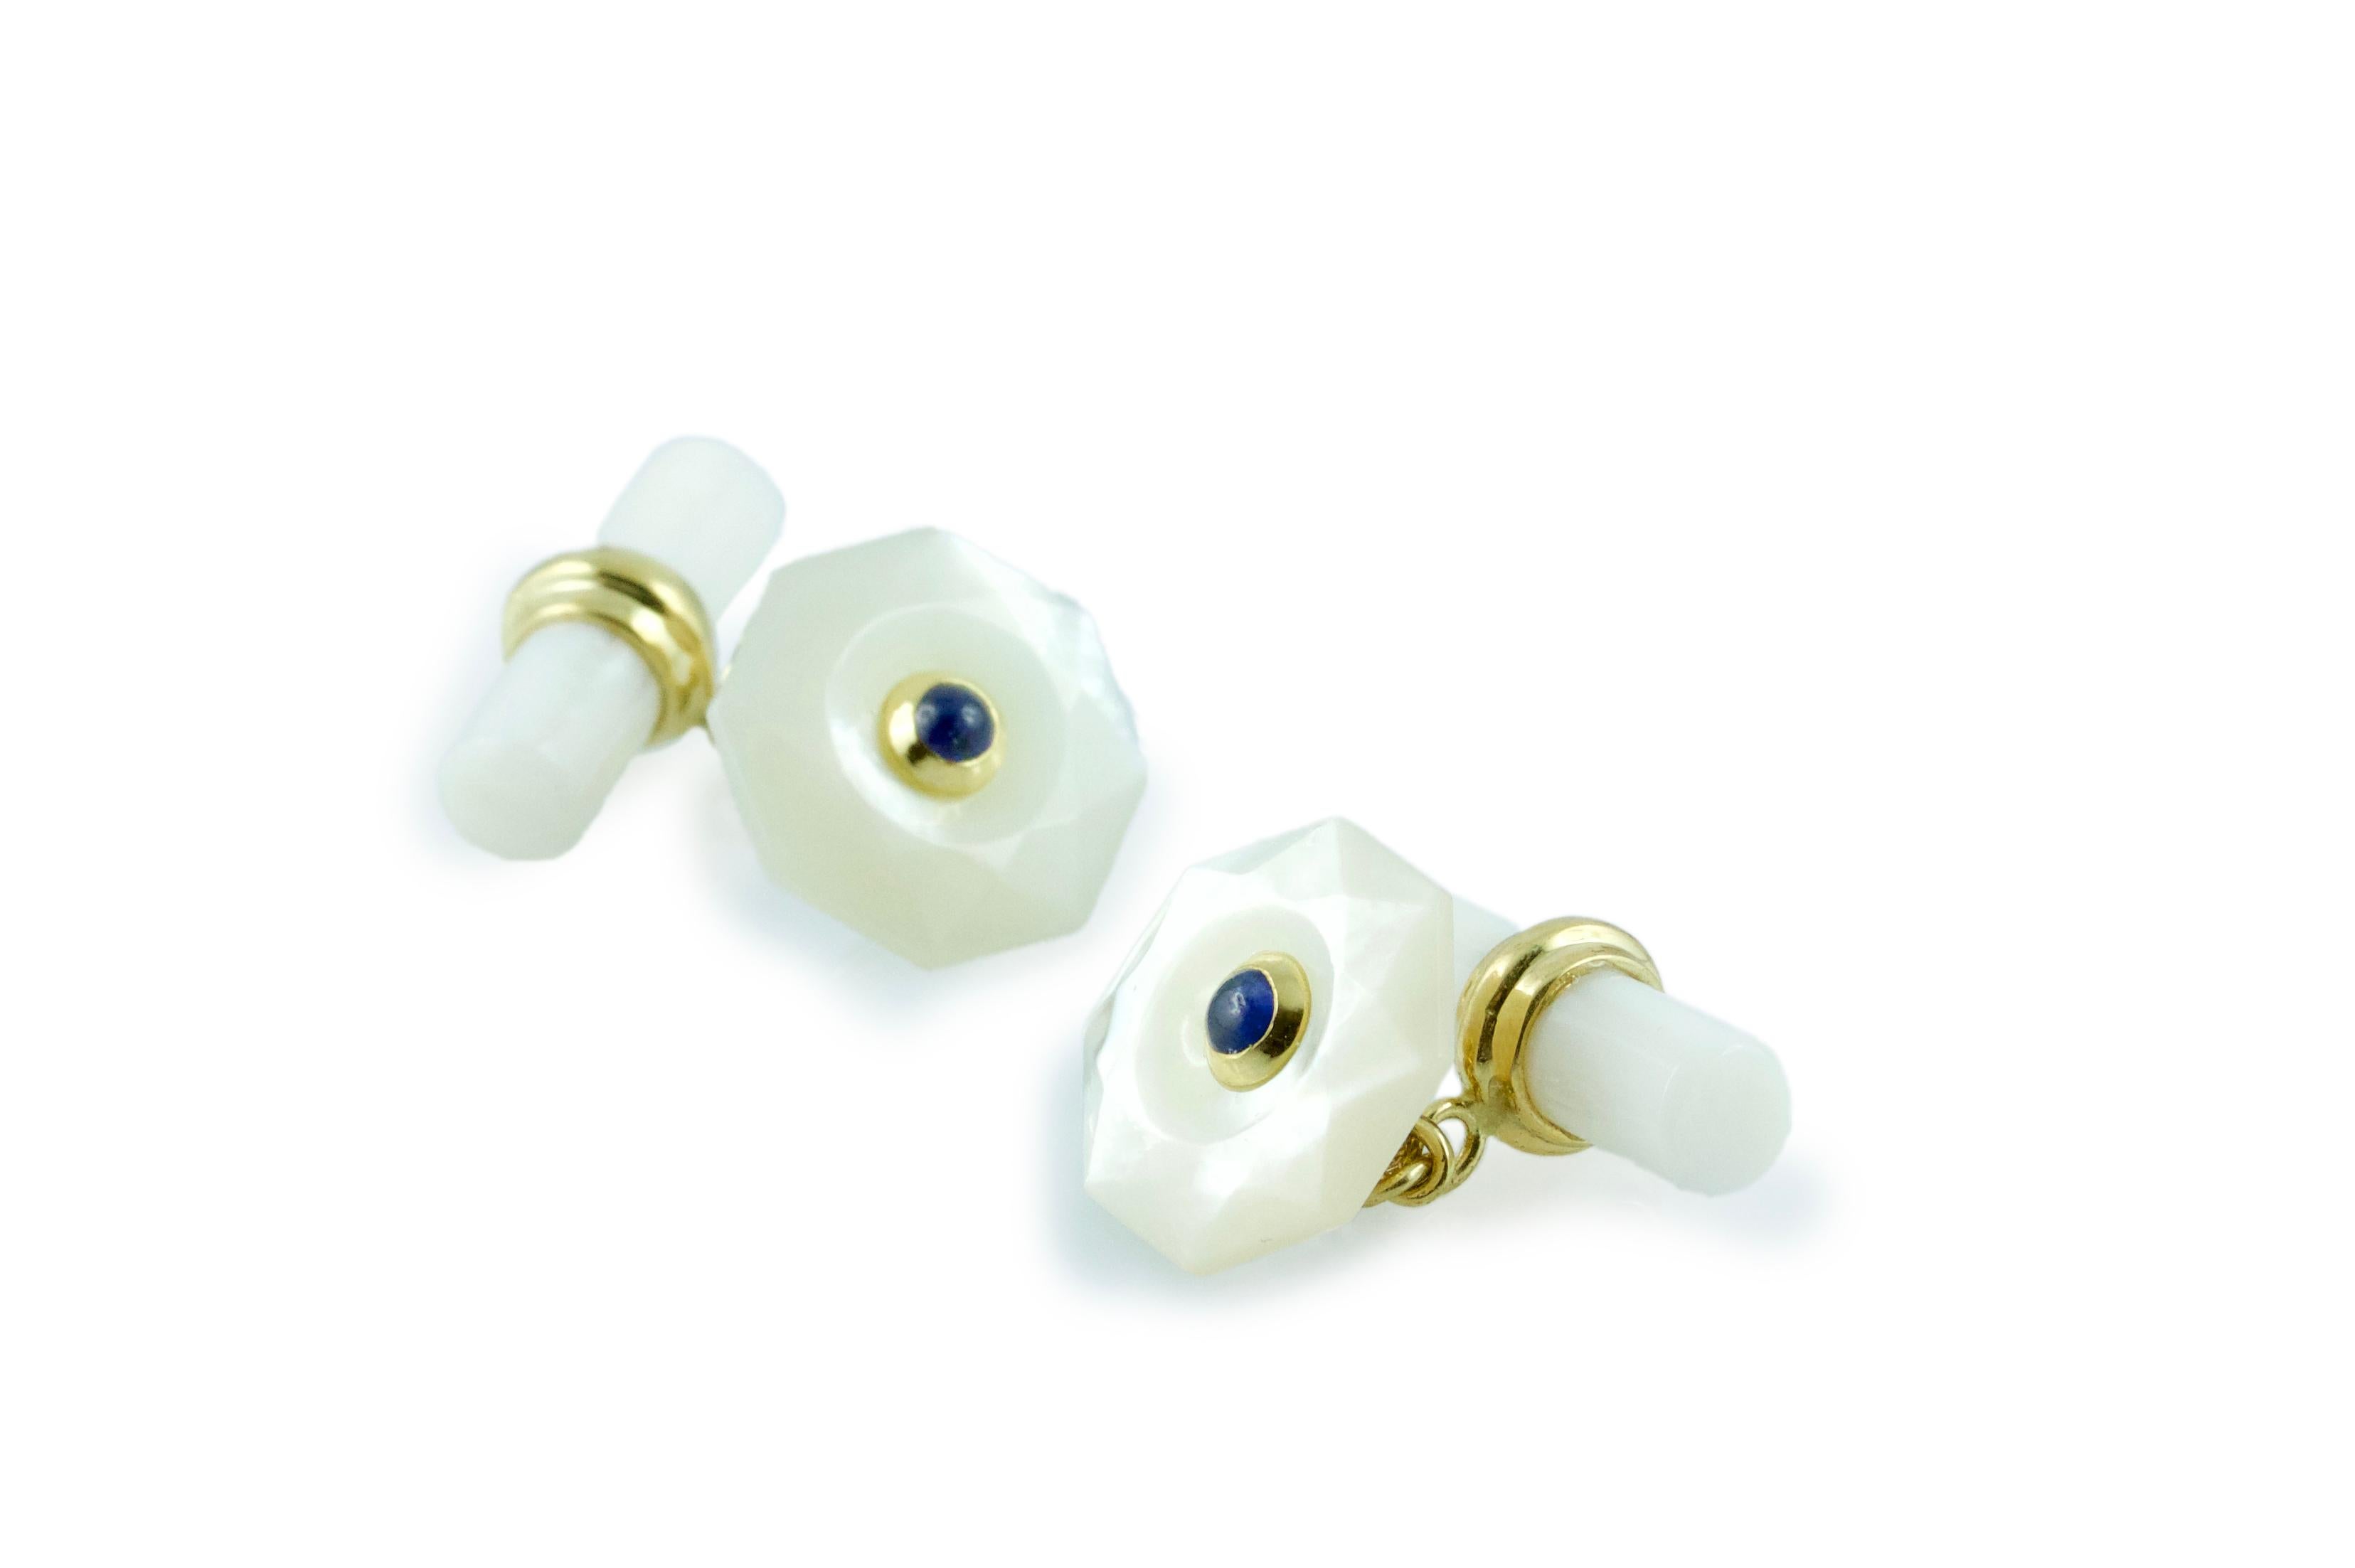 The front face of these exquisite cufflinks has a striking octagonal shape that is convex, multifaceted, and adorned in the center with a cabochon sapphire. Both the front face and the cylindrical toggle are in mother of pearl, with a post made of